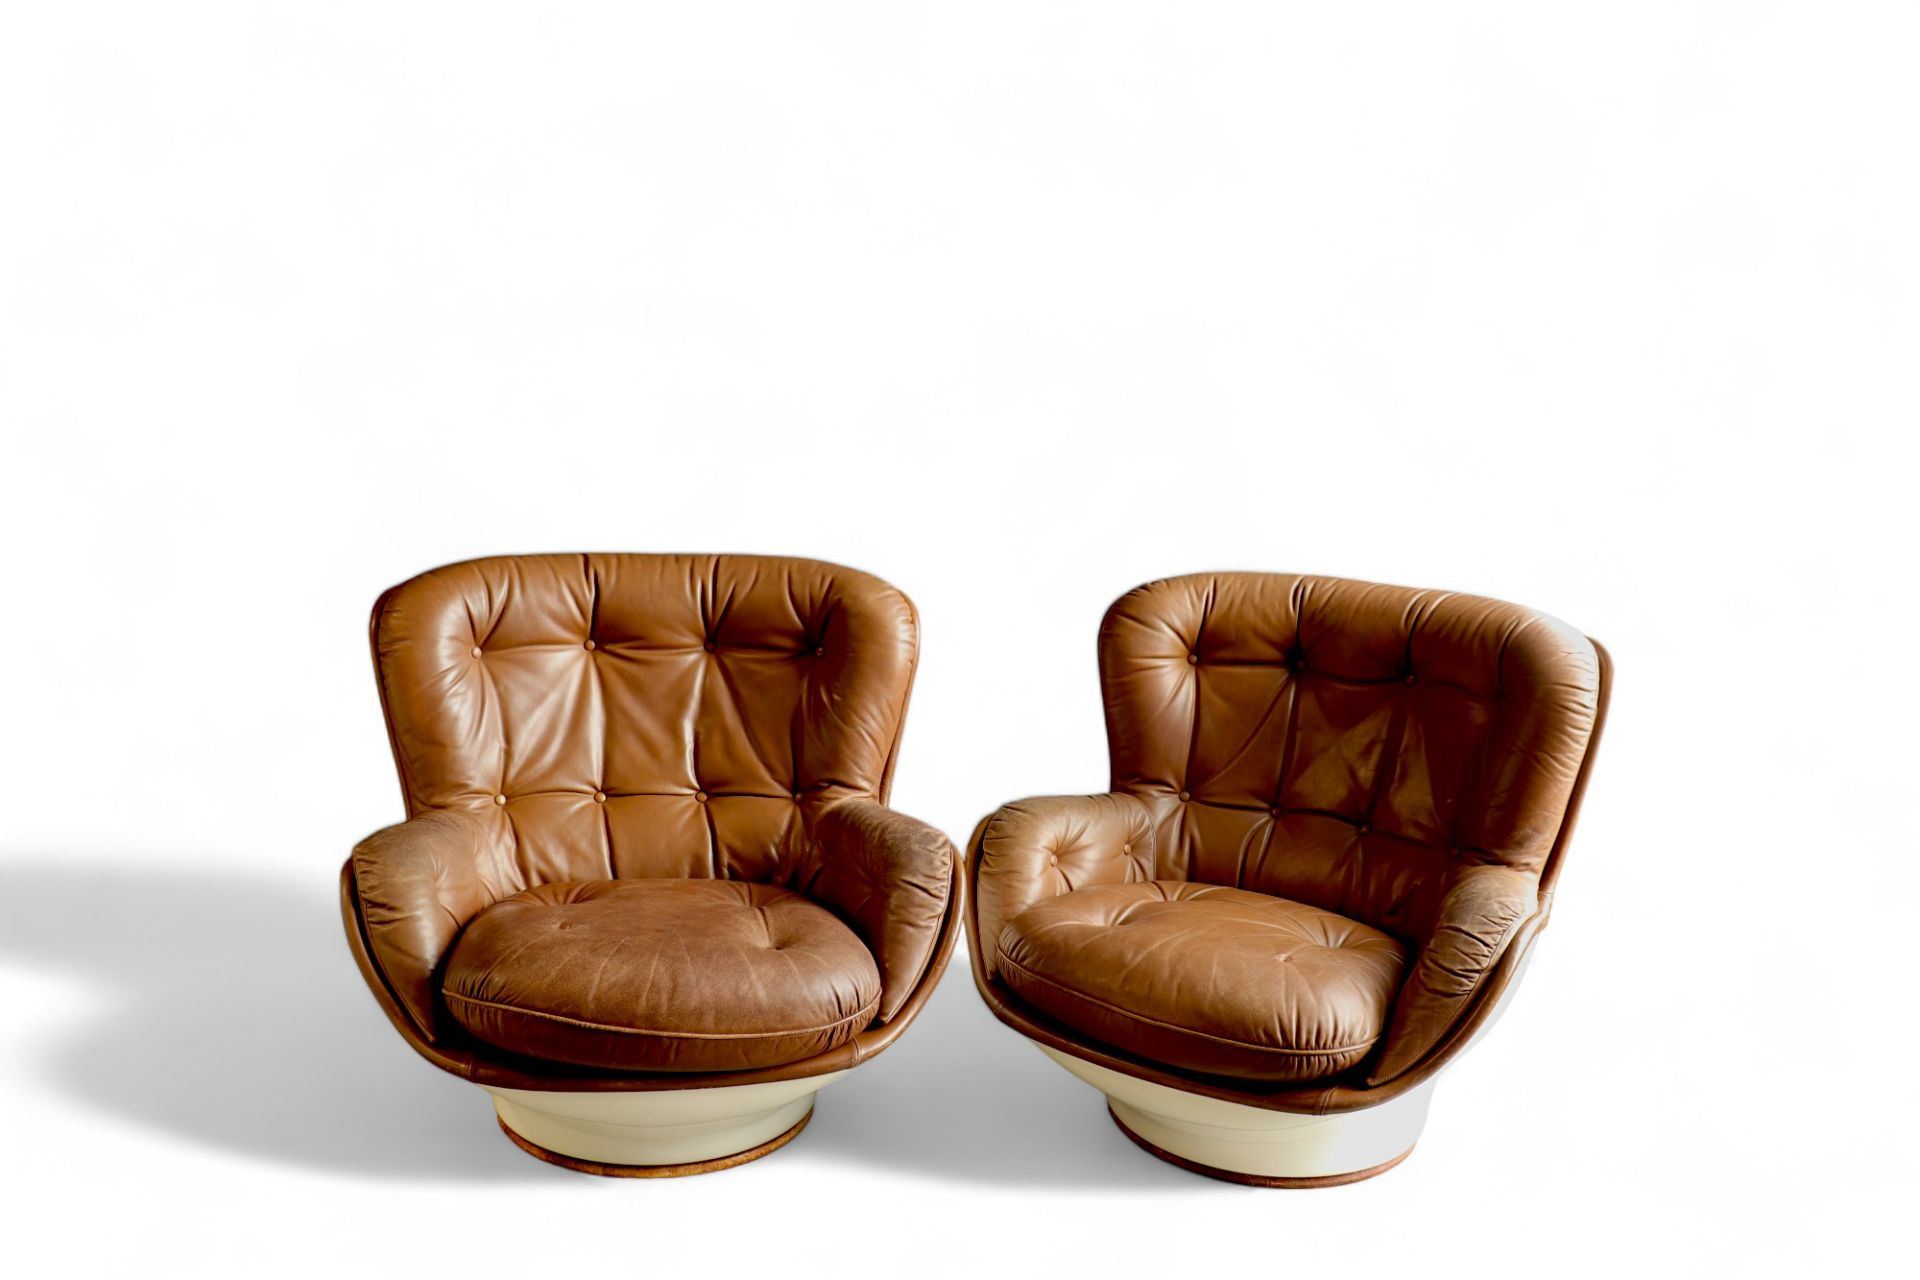 Michel CADESTIN (1942- ) - Set of two armchairs and a sofa model "Karate" Airborne edition in leathe - Image 2 of 4